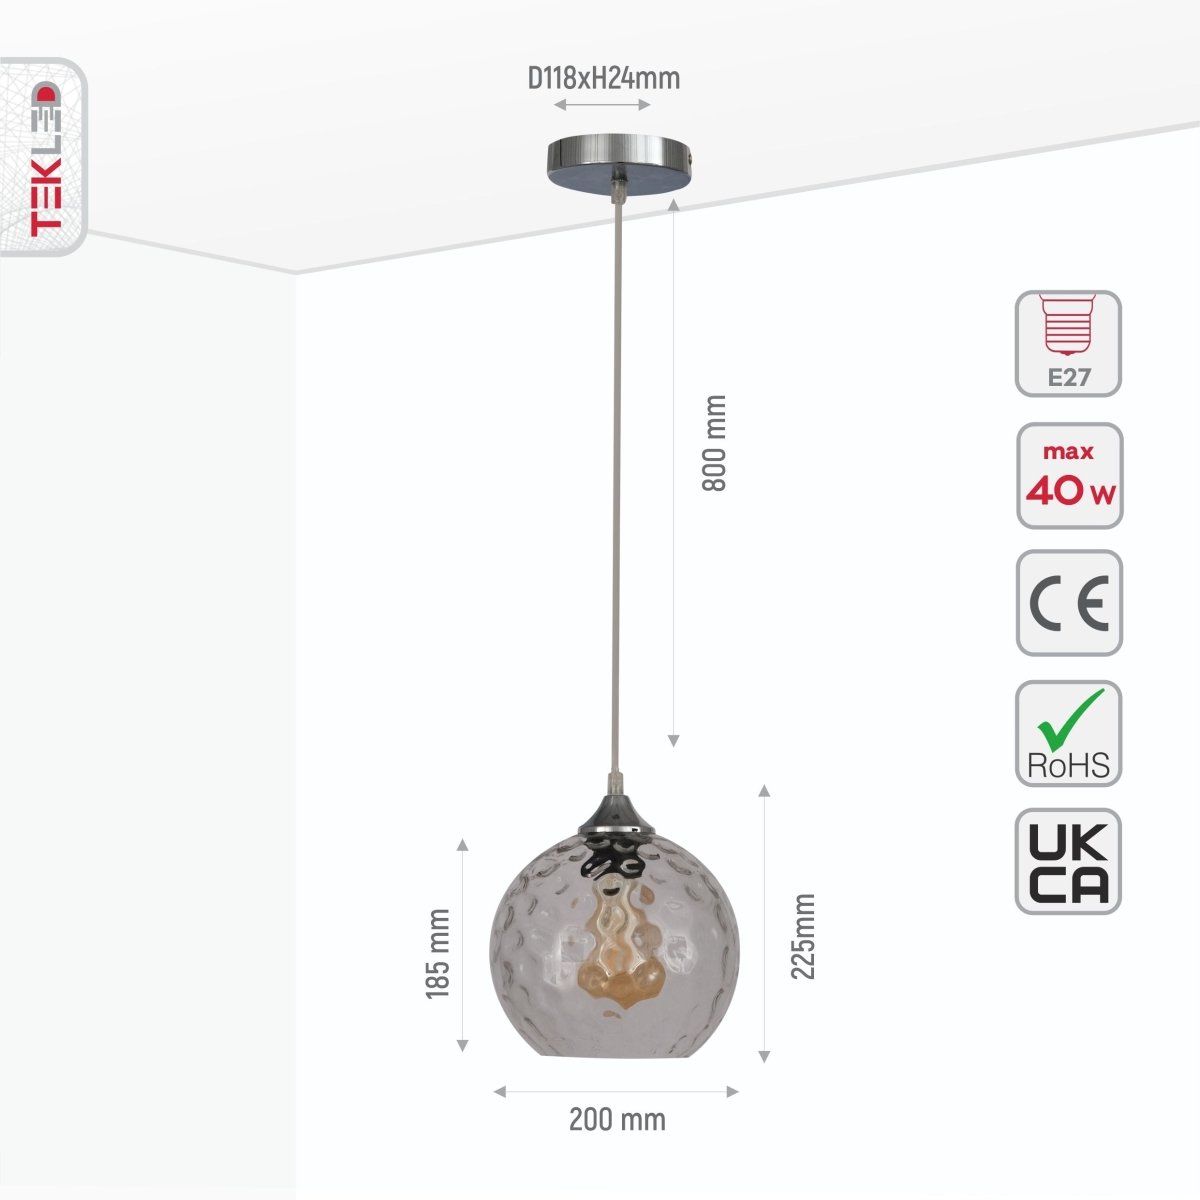 Size and specs of Clear Glass Pendant Light D200 with E27 Fitting | TEKLED 158-19670